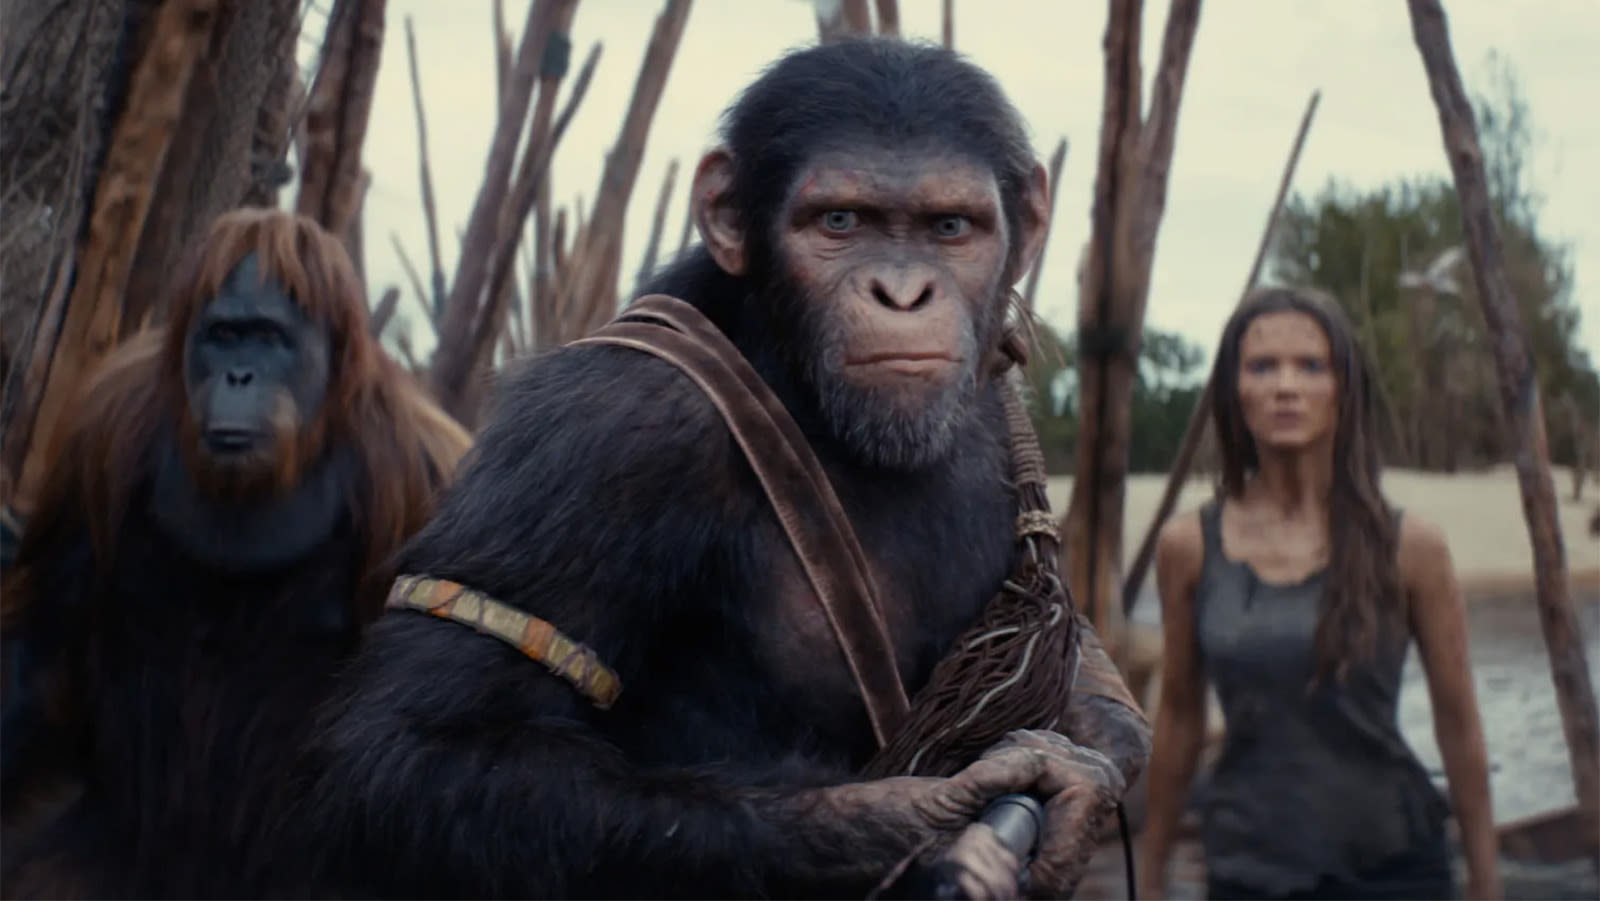 Kingdom Of The Planet Of The Apes Credits Have A Sneaky Hint For The Sequel - SlashFilm